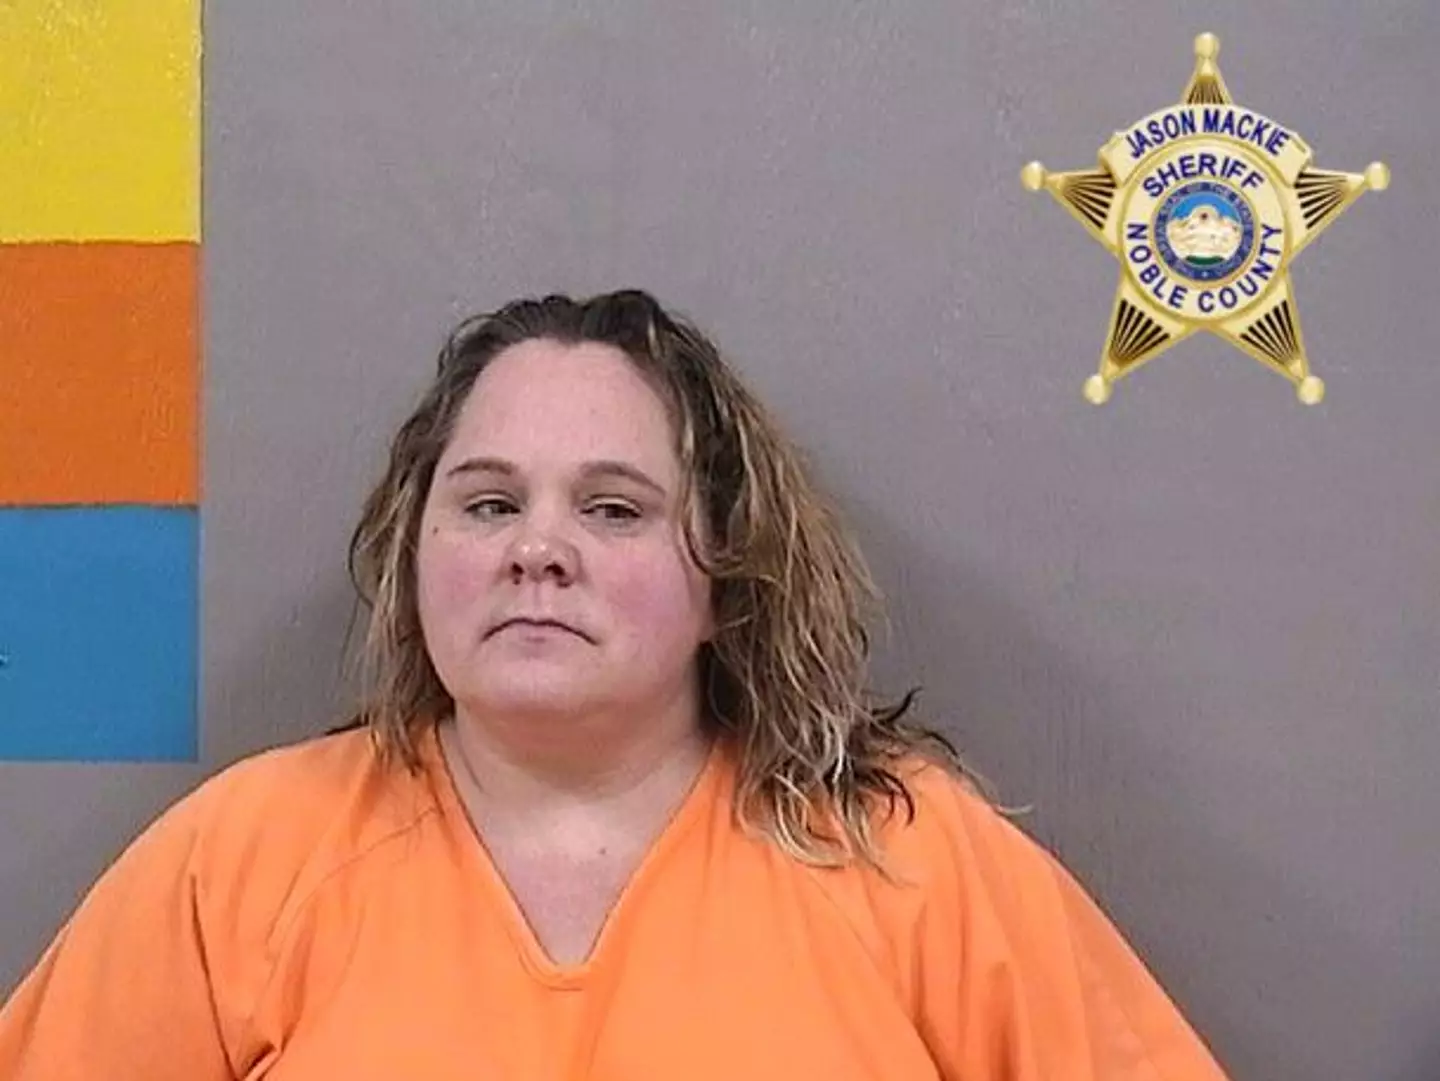 Pamela Reed, 41, has been charged with theft by deception after allegedly faking that her seven-year-old has cancer.